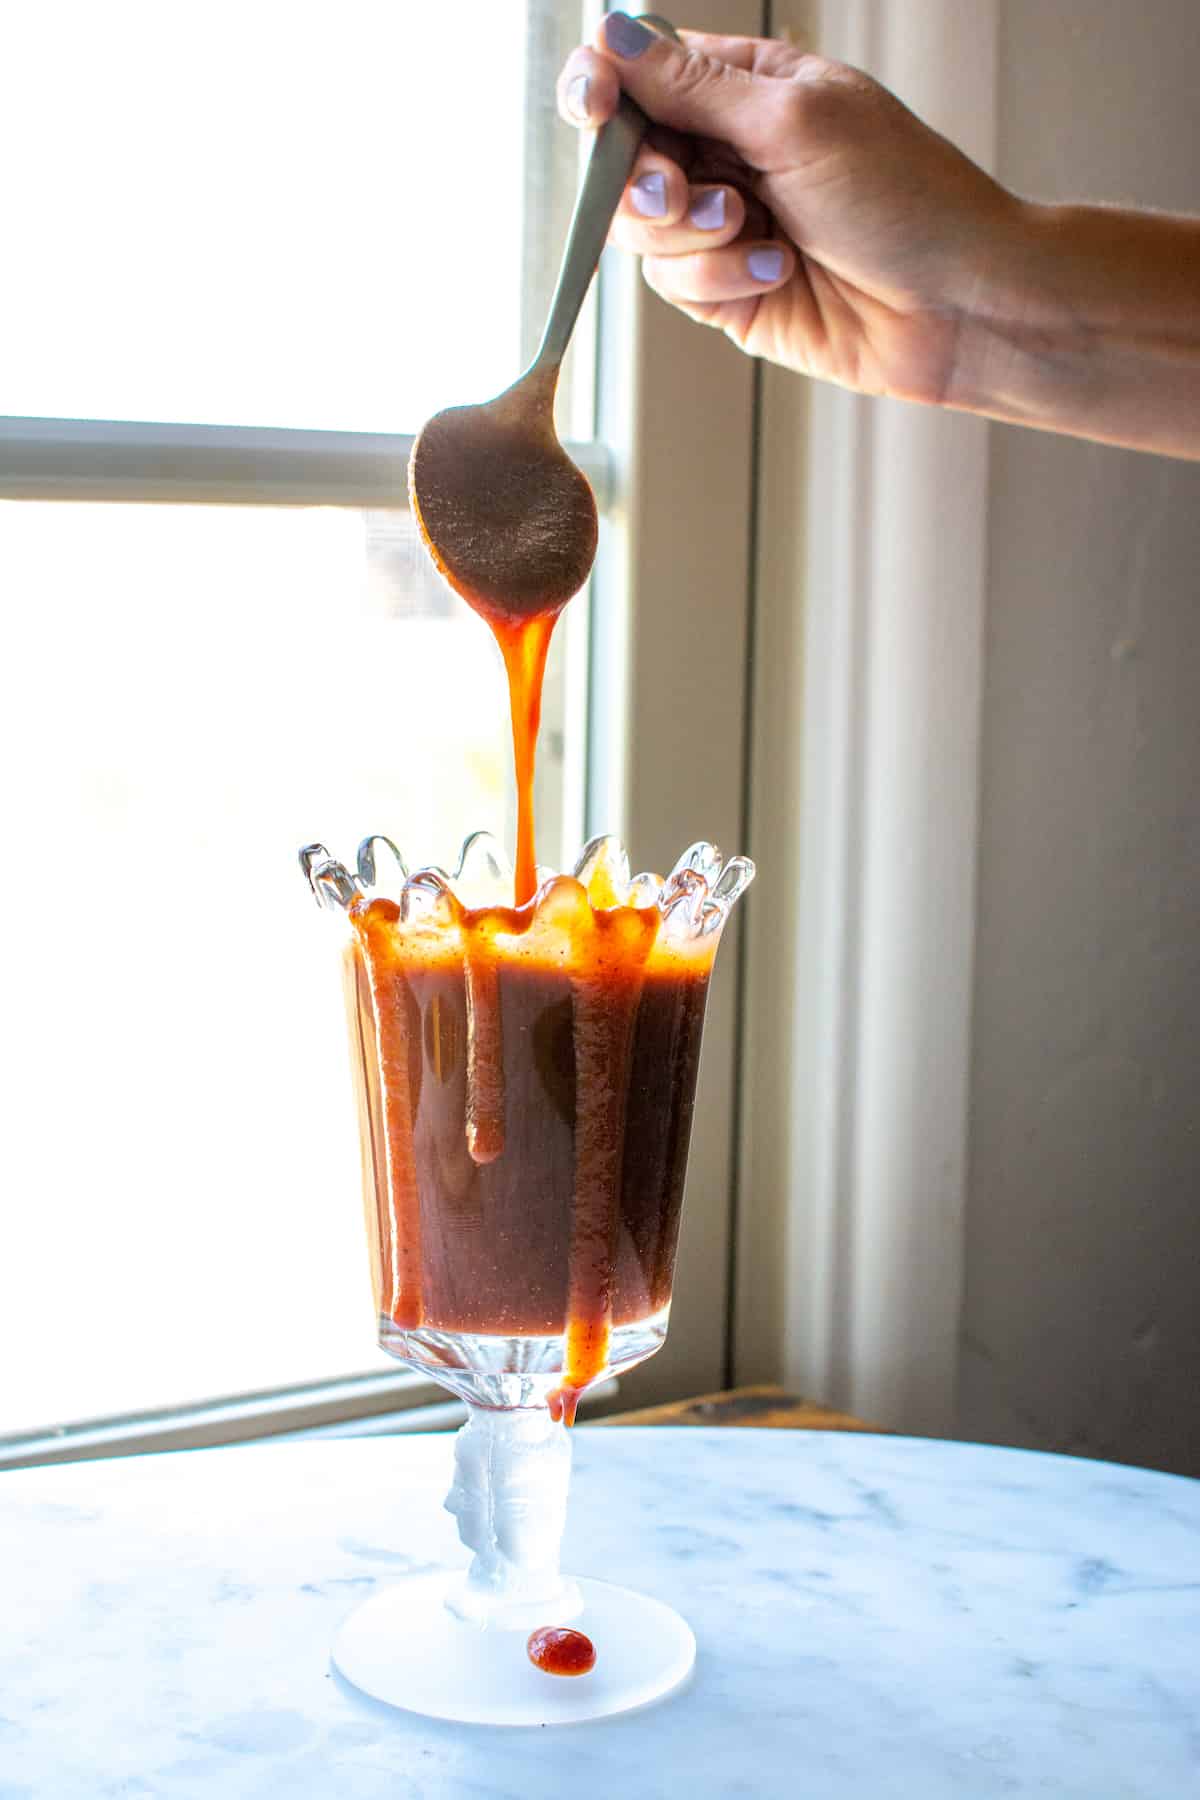 Homemade Chamoy sauce is a thing of beauty. This sweet, salty, sour, spicy sauce is an explosion of flavor and completely addictive. Drizzle over fresh fruit, rim your cocktail glass, heck, eat it with a spoon! I guarantee you'll find a million and one reasons to make this sauce. Vegan and gluten-free! #chamoy #holajalapeno #chamoysauce #homemadechamoy